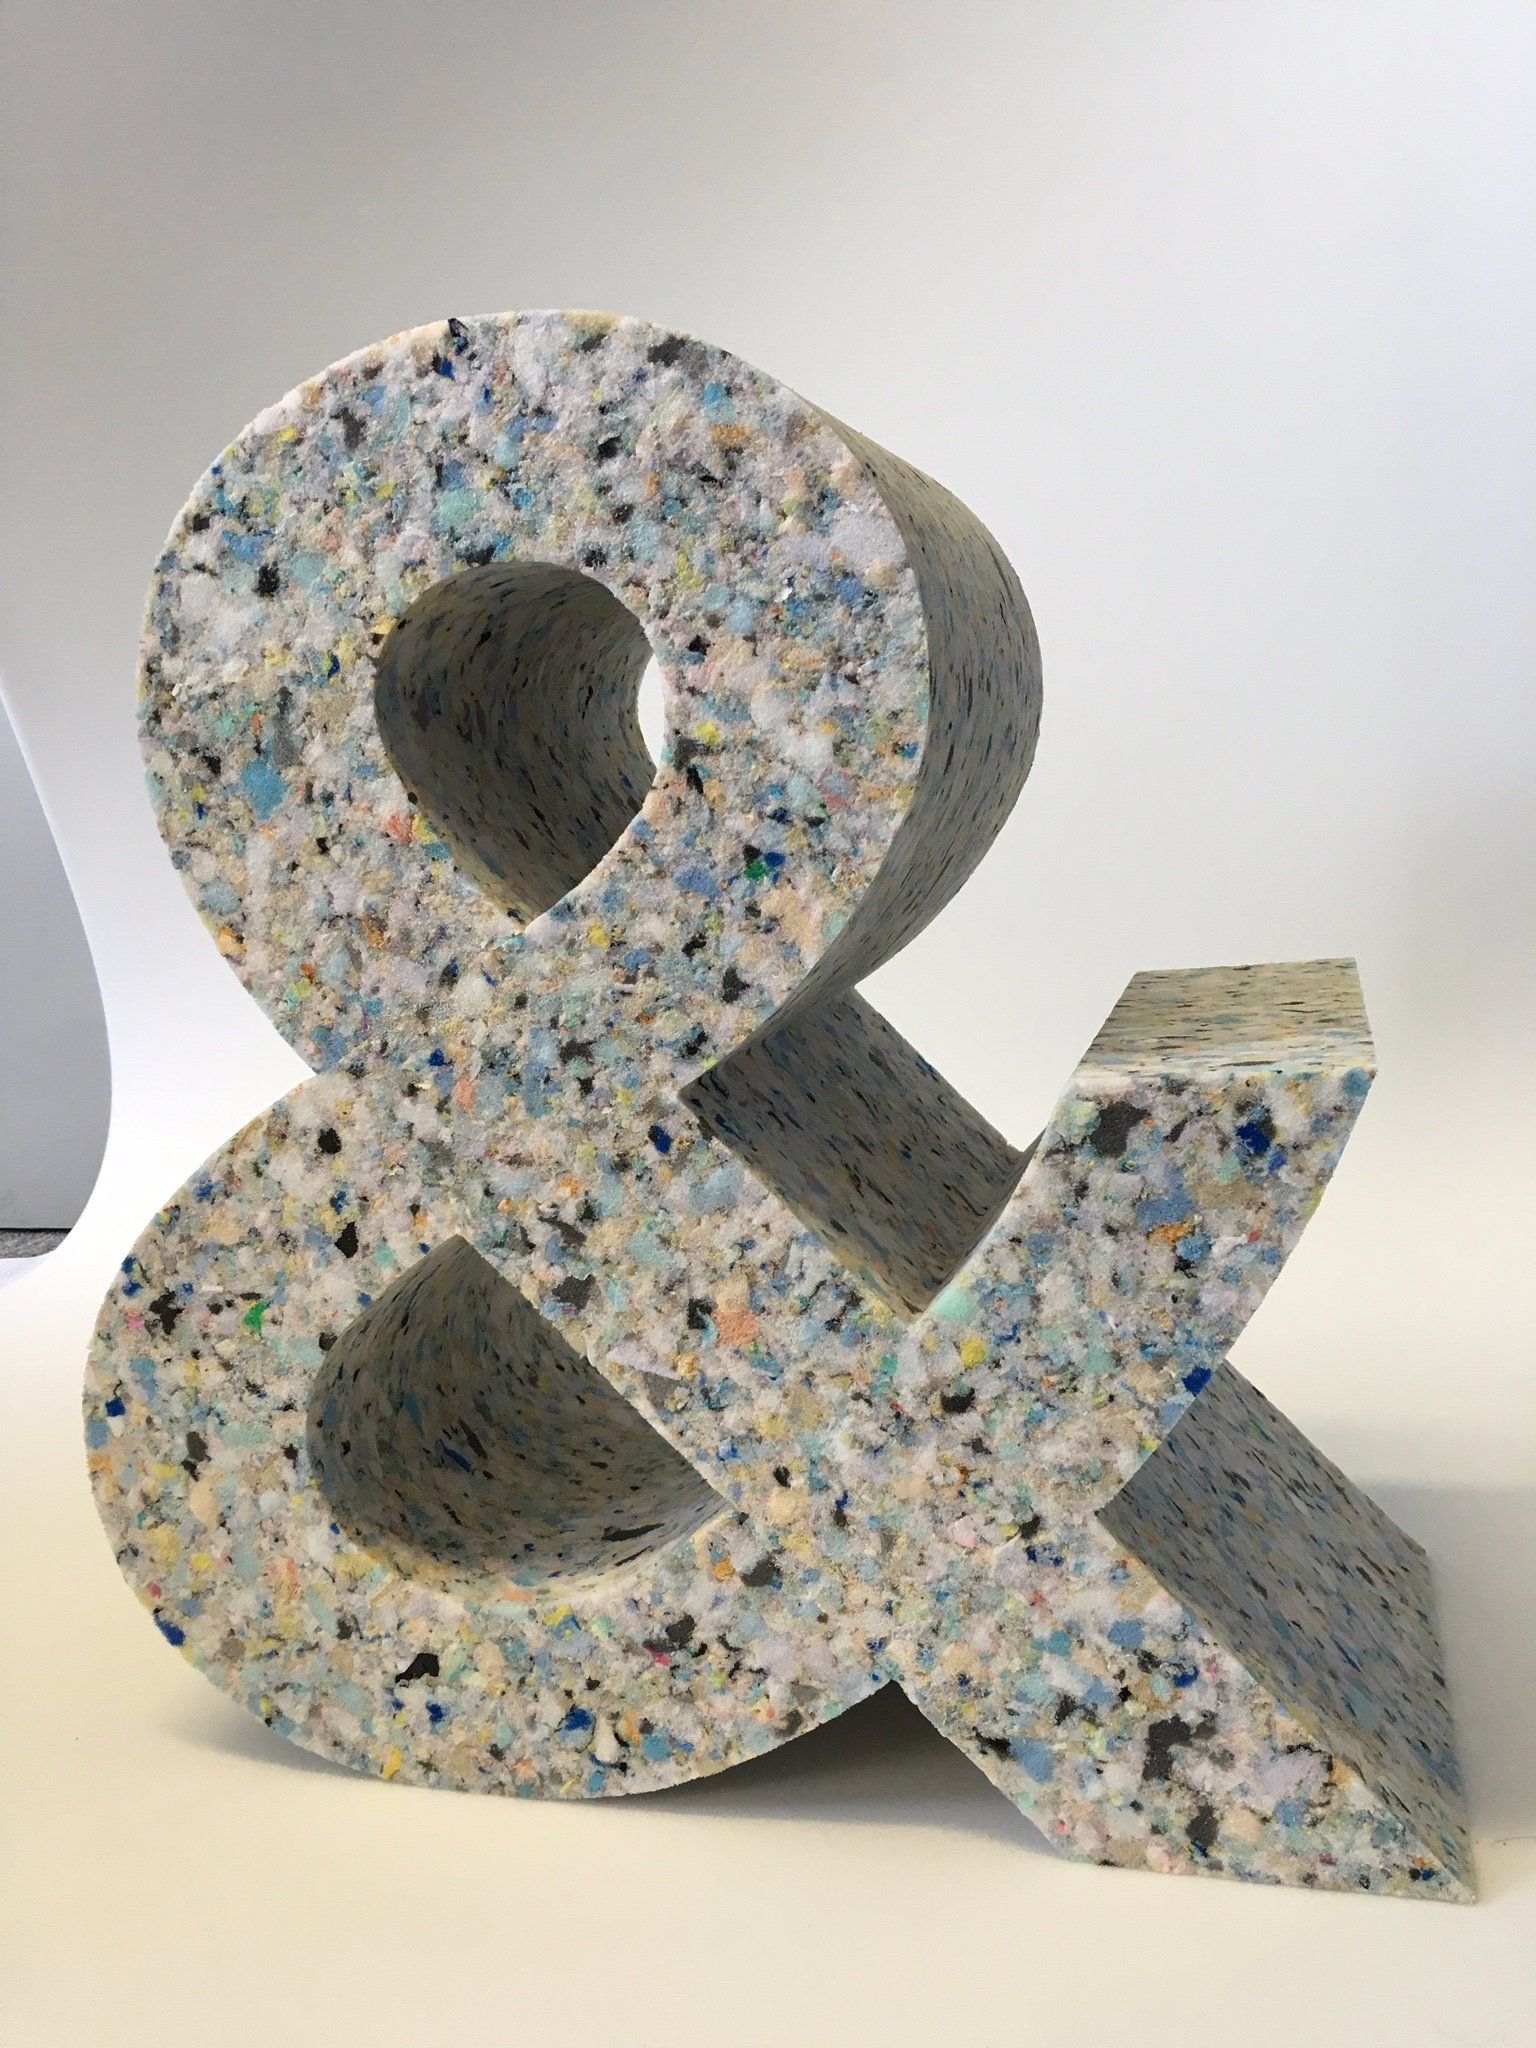 The recycled ampersand